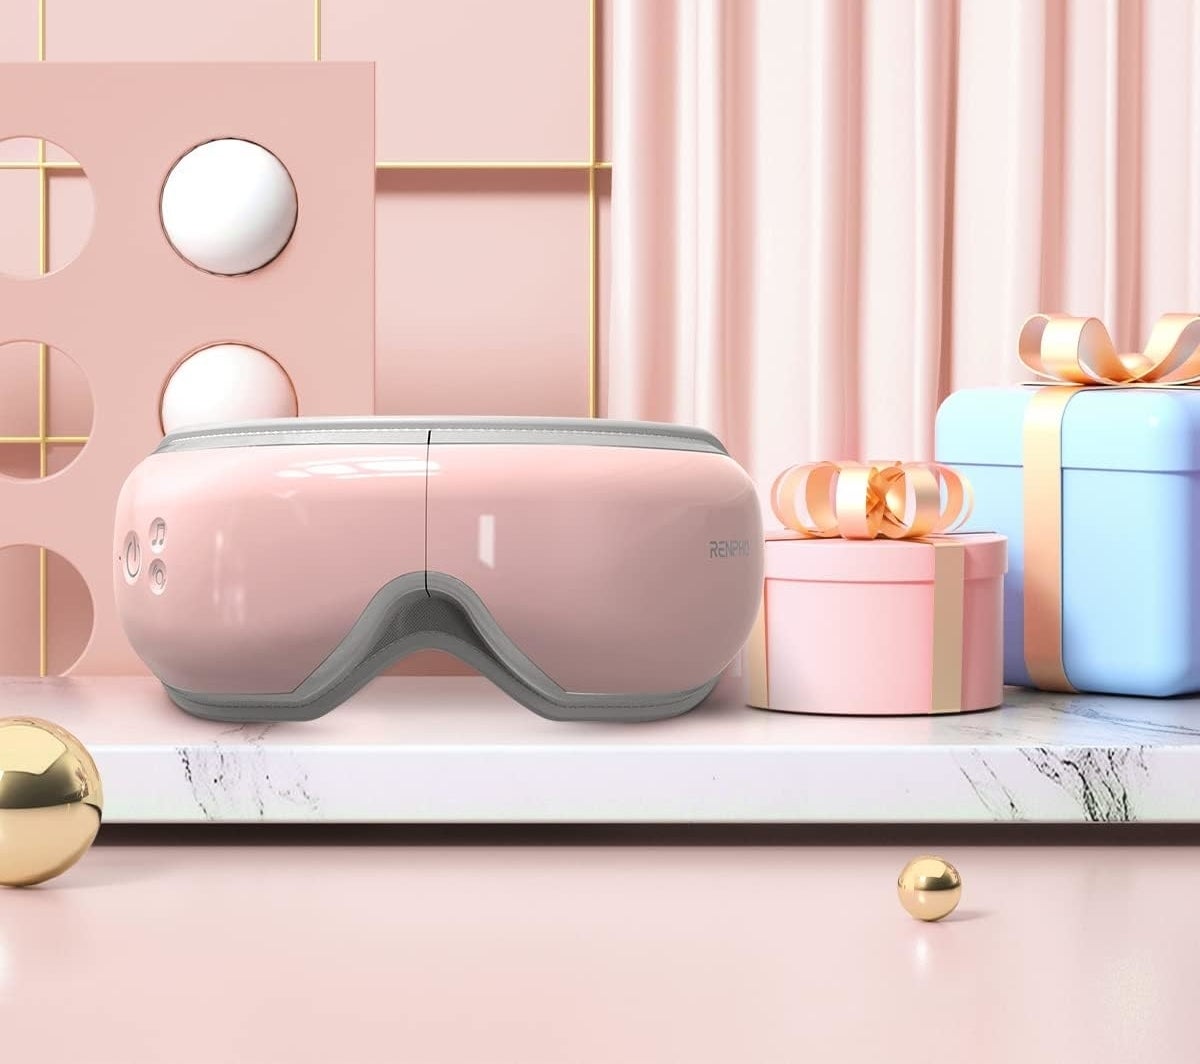 The eye massager in pink